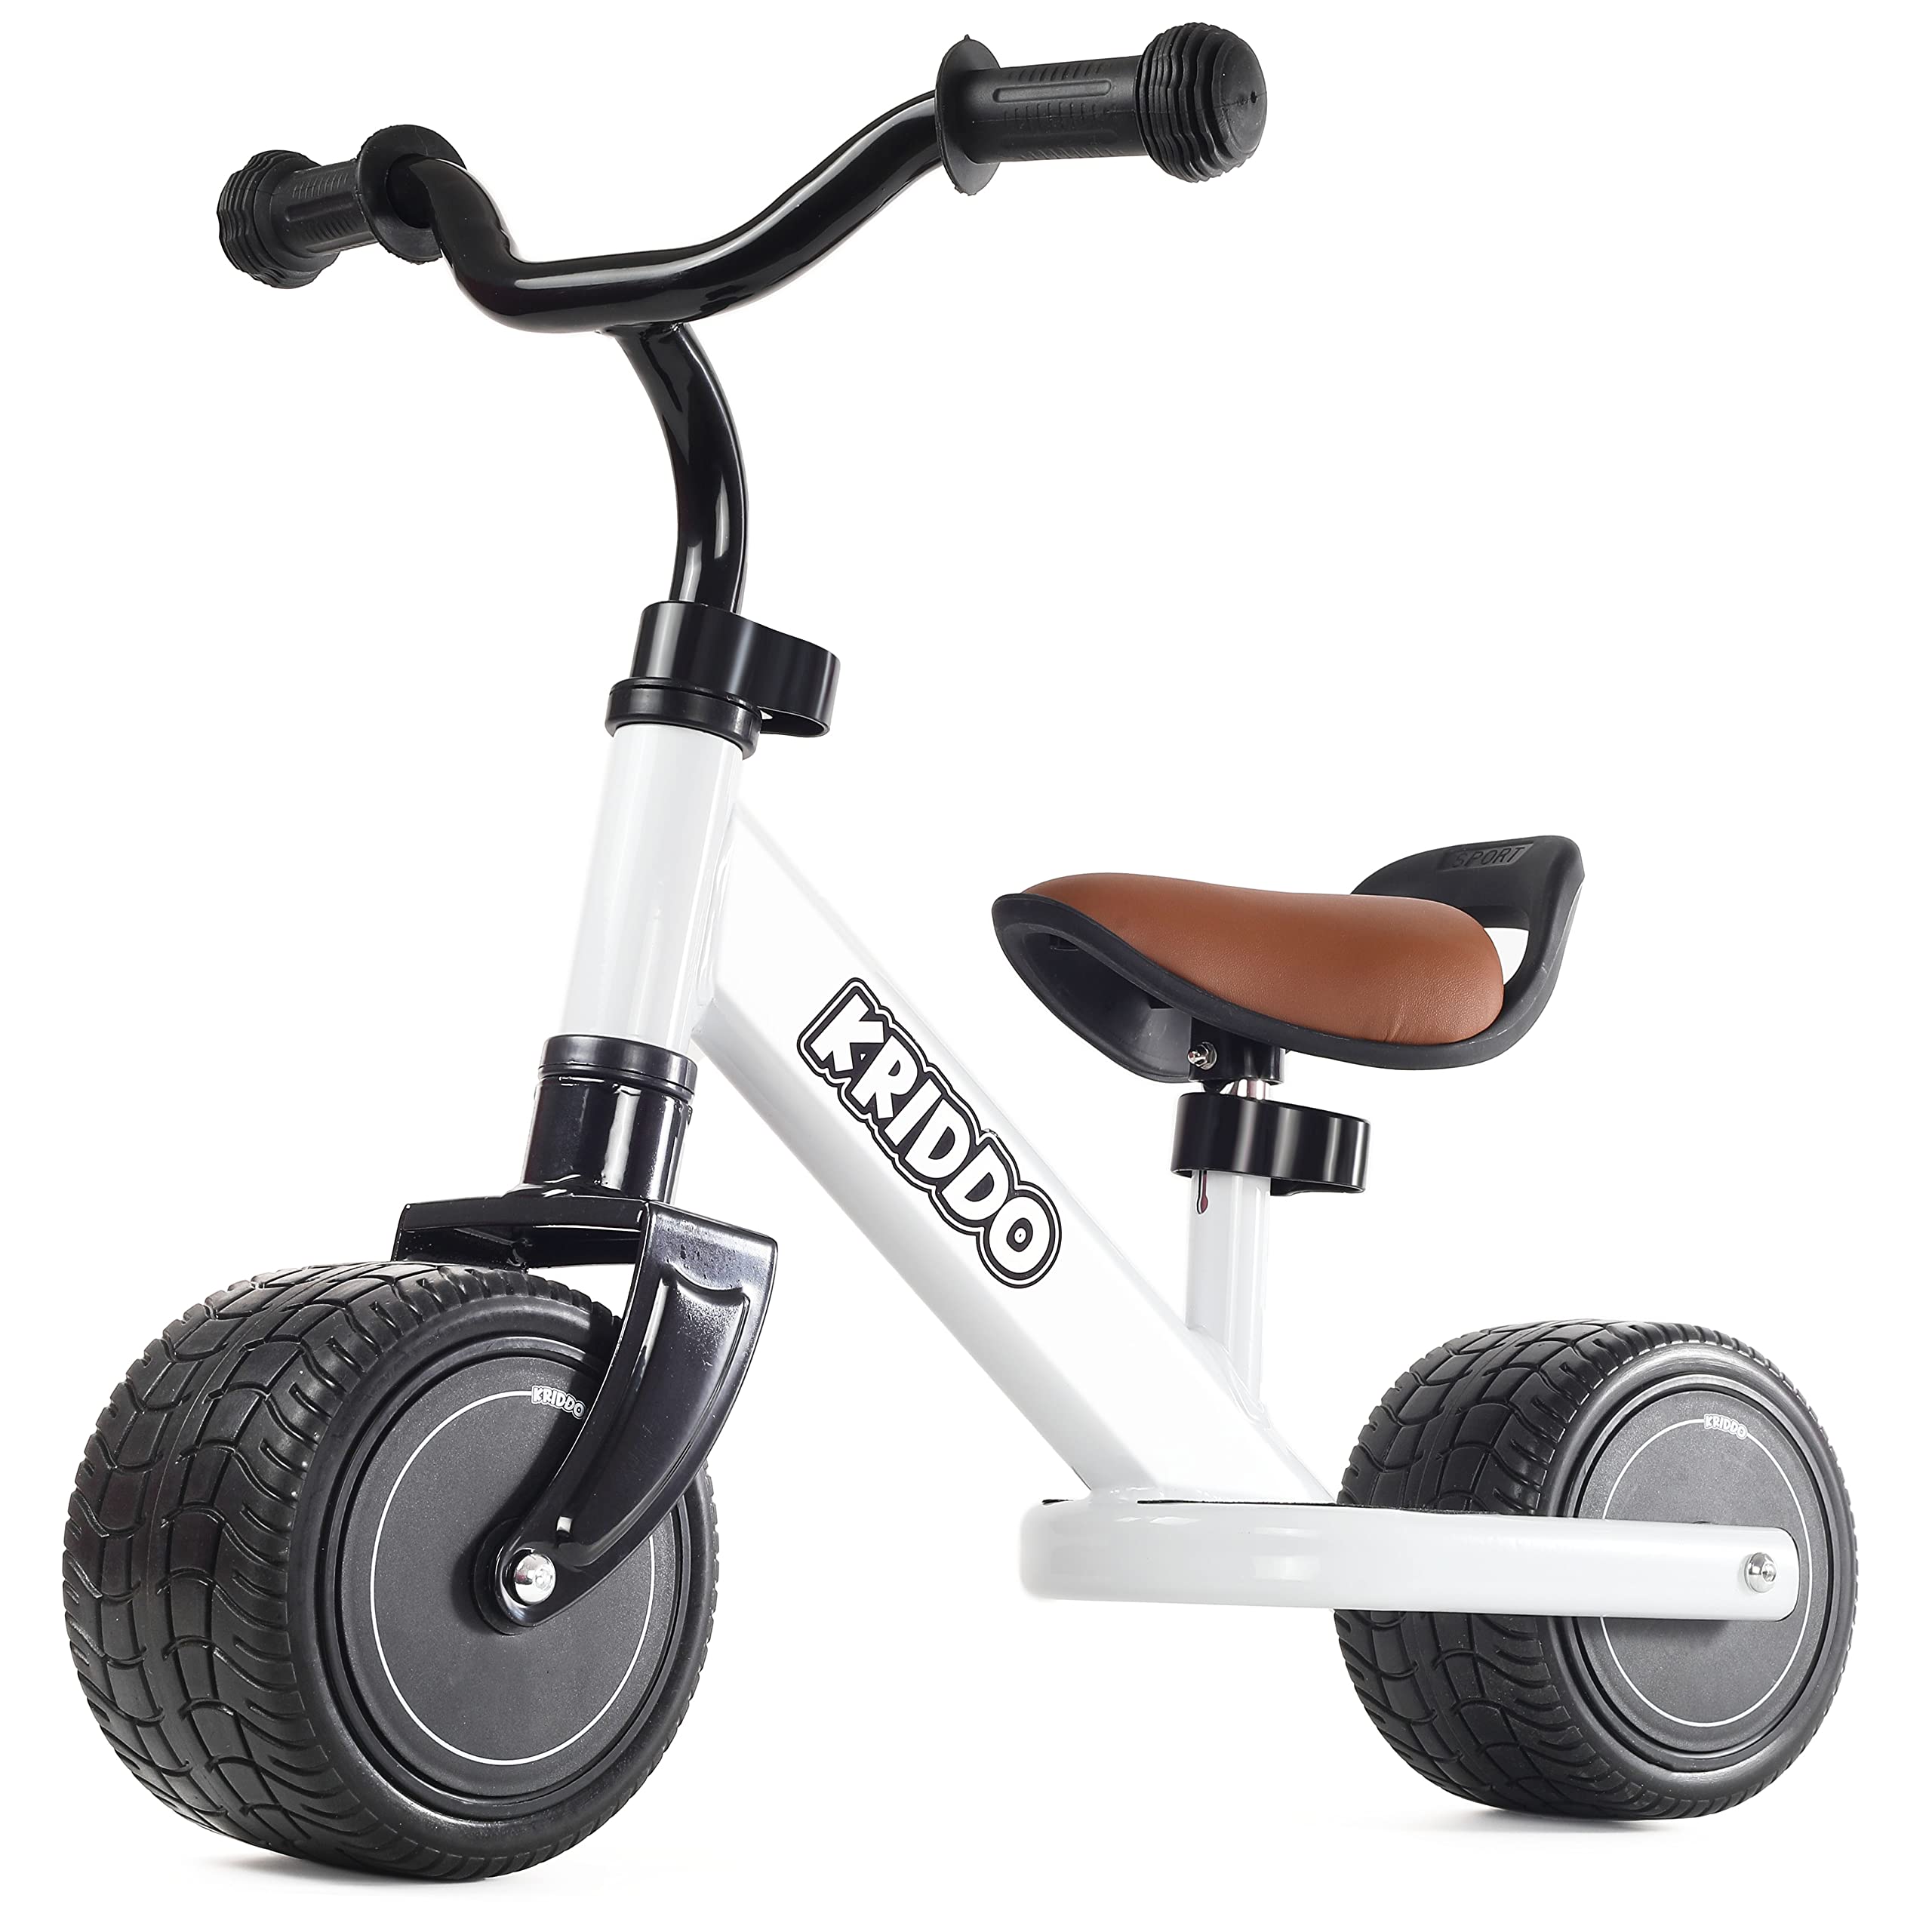 KRIDDO Baby Balance Bike 1-3 Year Old, Mini Cruiser Bike for One Year Old First Birthday Gifts Baby Toys 12 Months to 3 Year Old, White